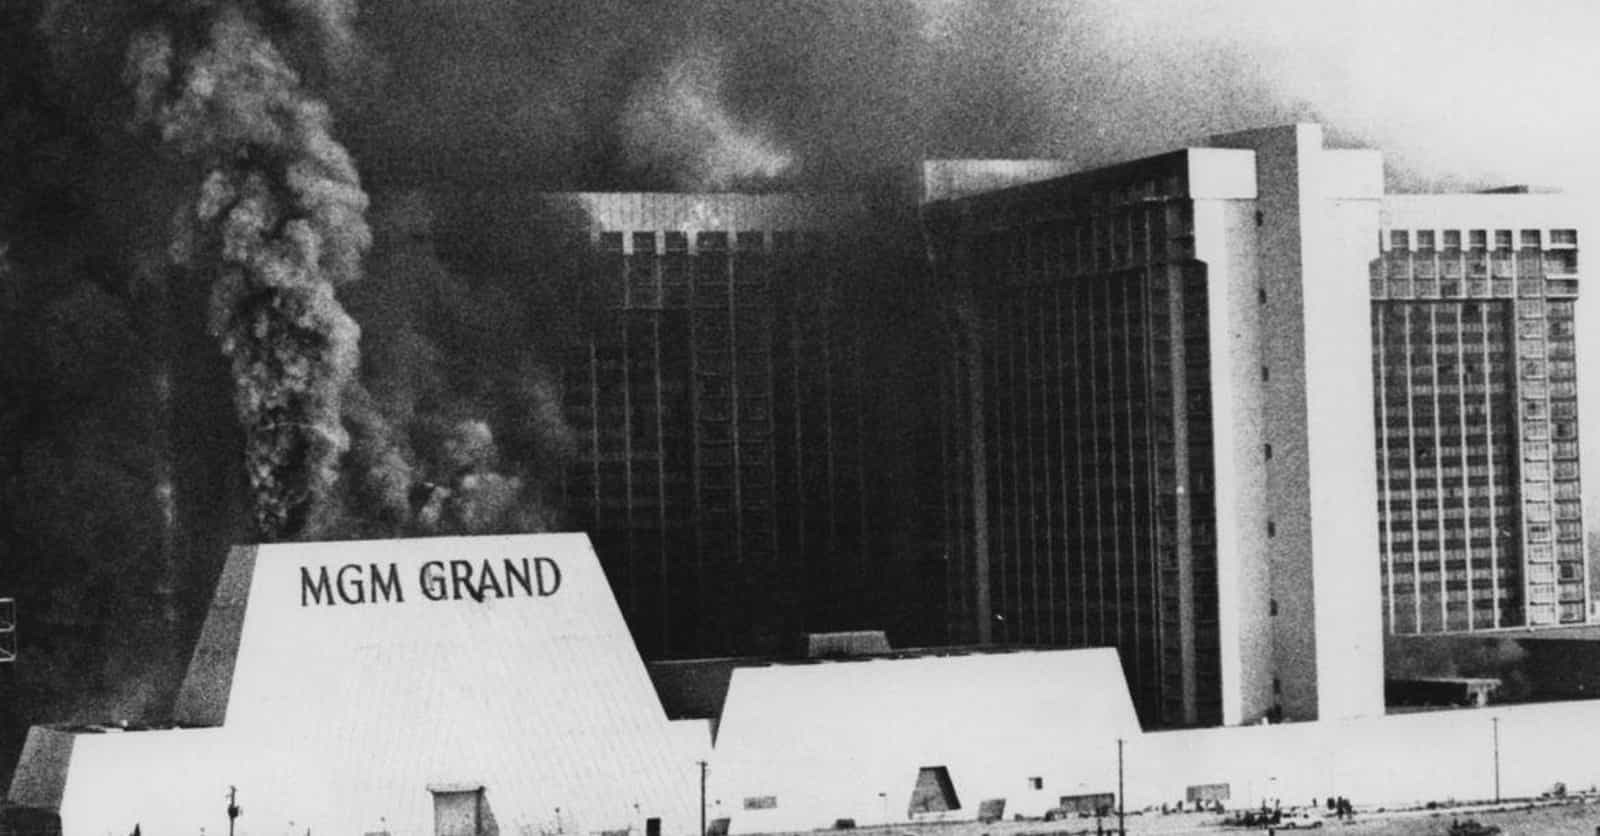 The MGM Grand Fire And How It Changed Las Vegas Forever